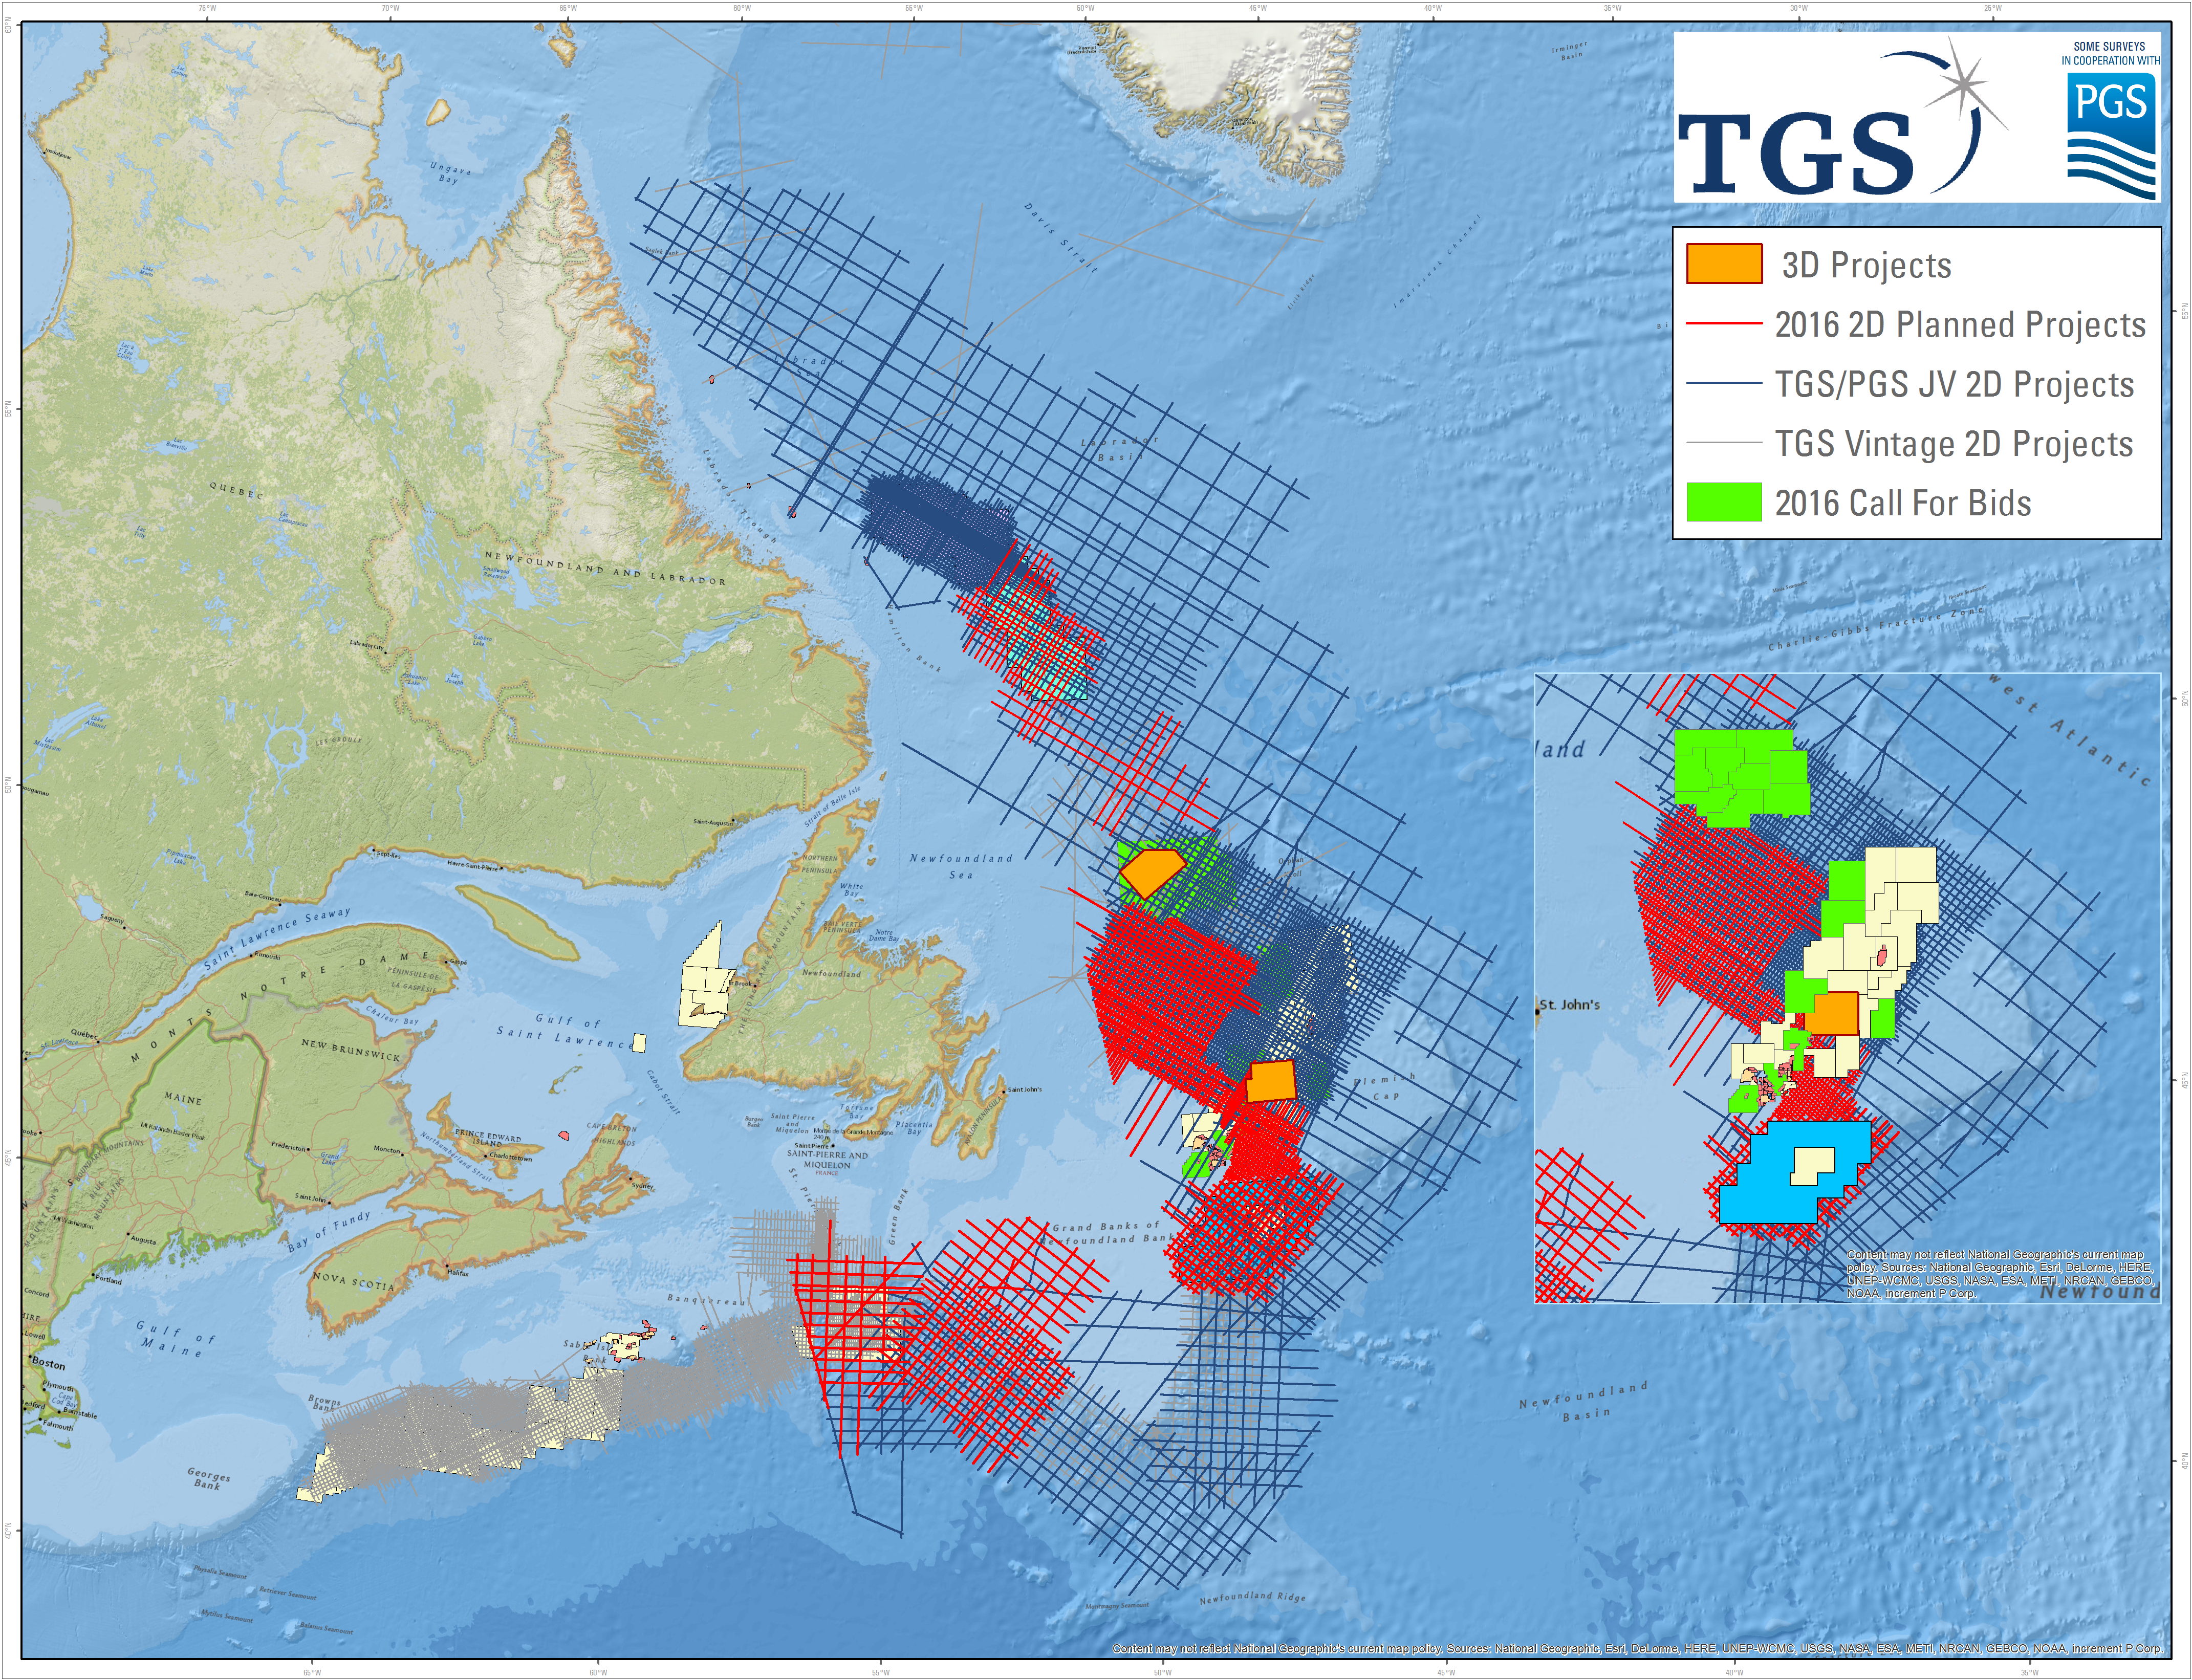 TGS will carry out more seismic work